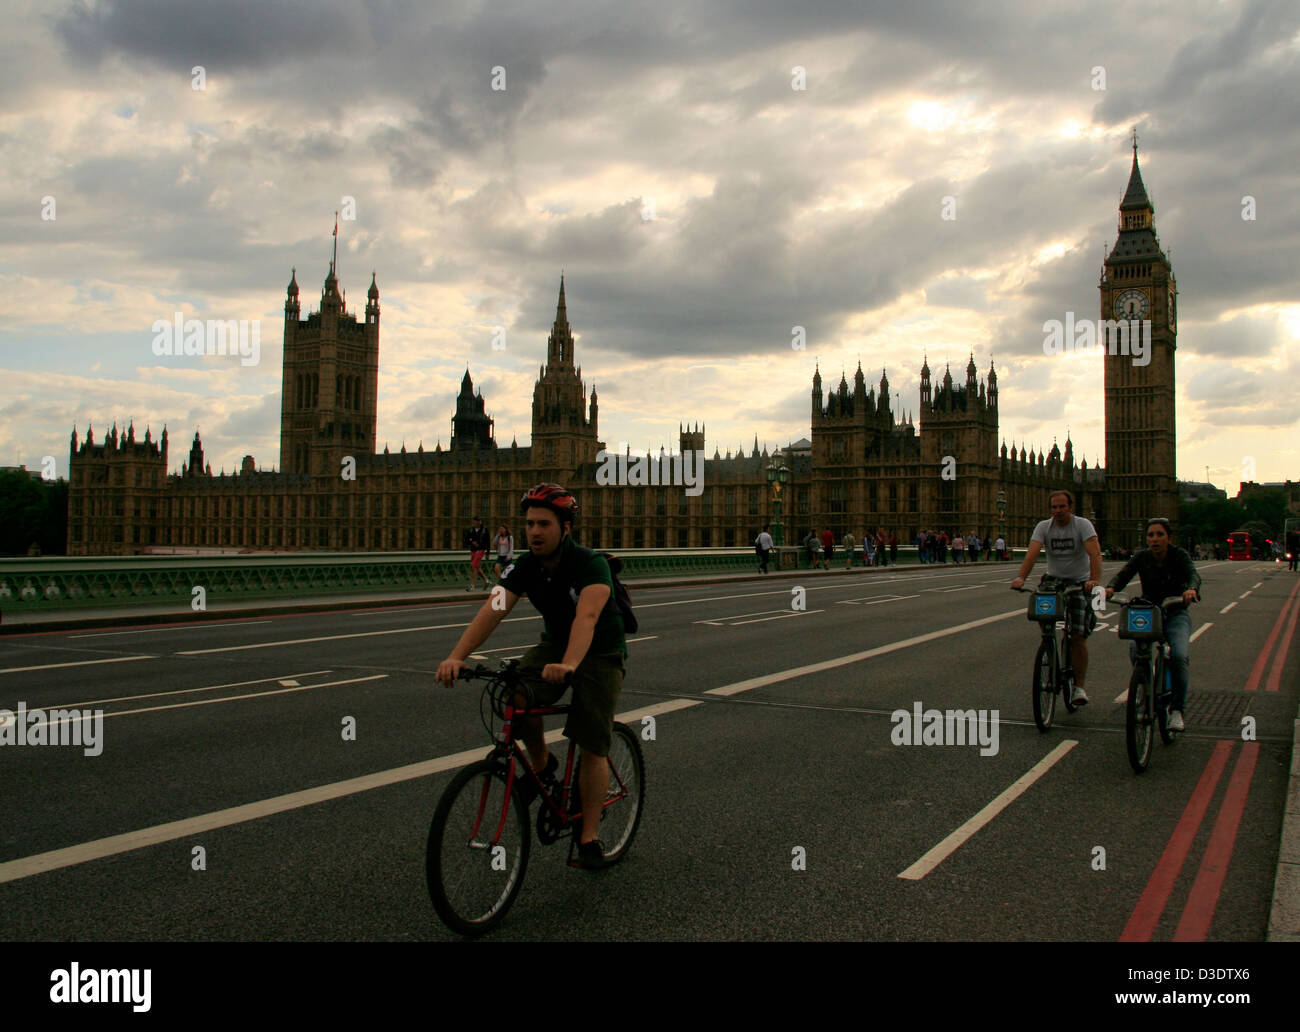 Cyclist in london near House of Parliament, London, England Stock Photo